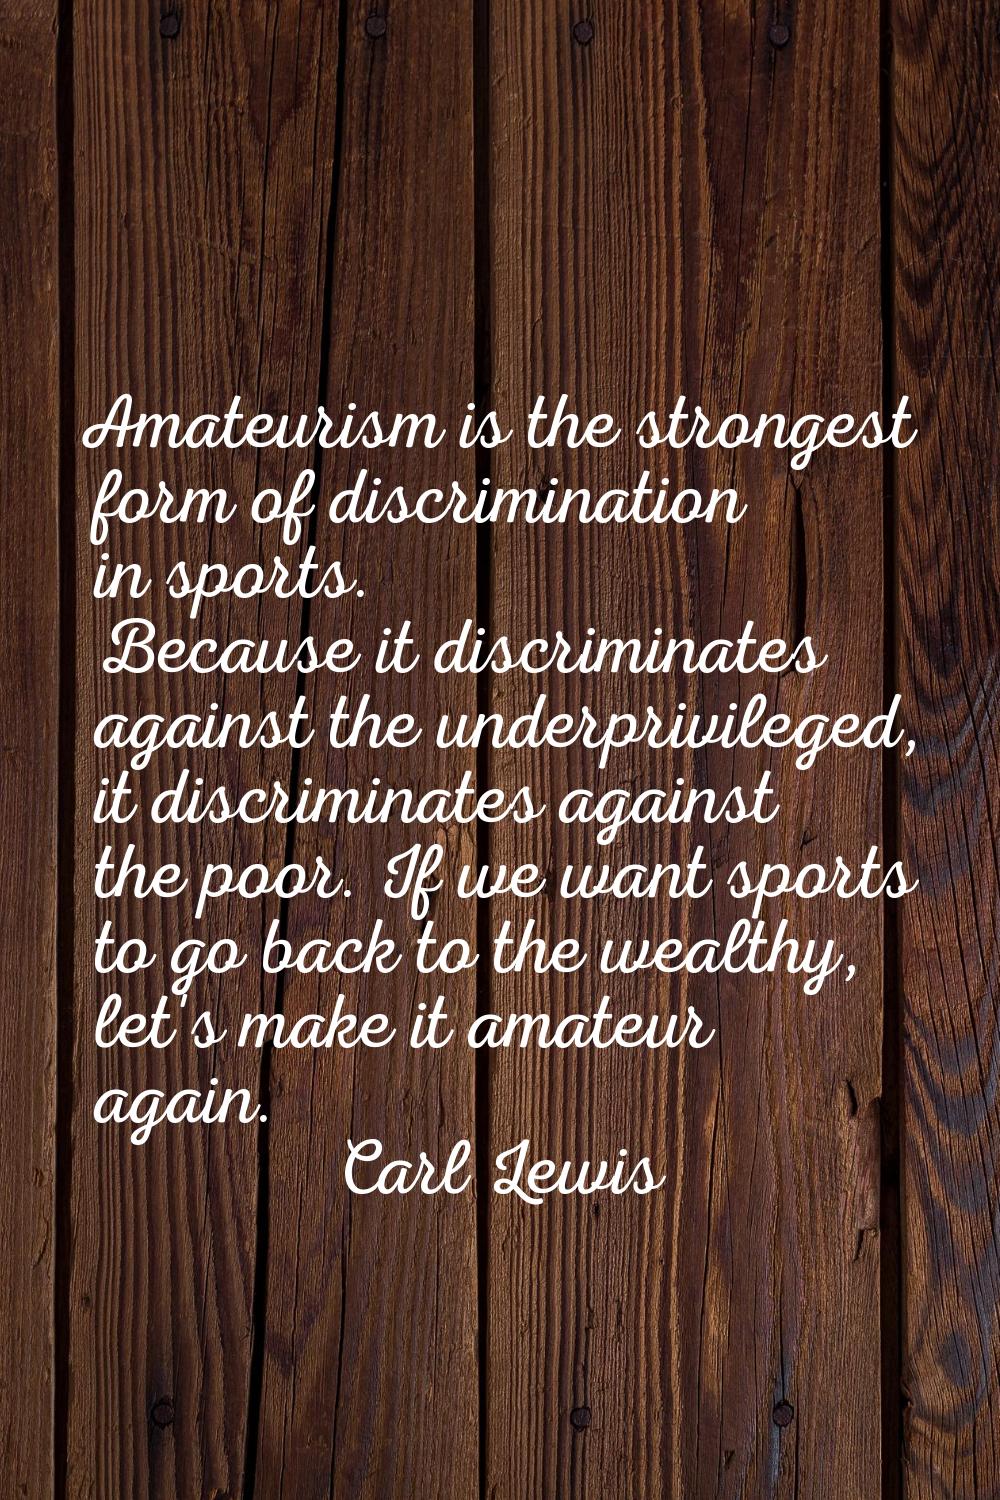 Amateurism is the strongest form of discrimination in sports. Because it discriminates against the 